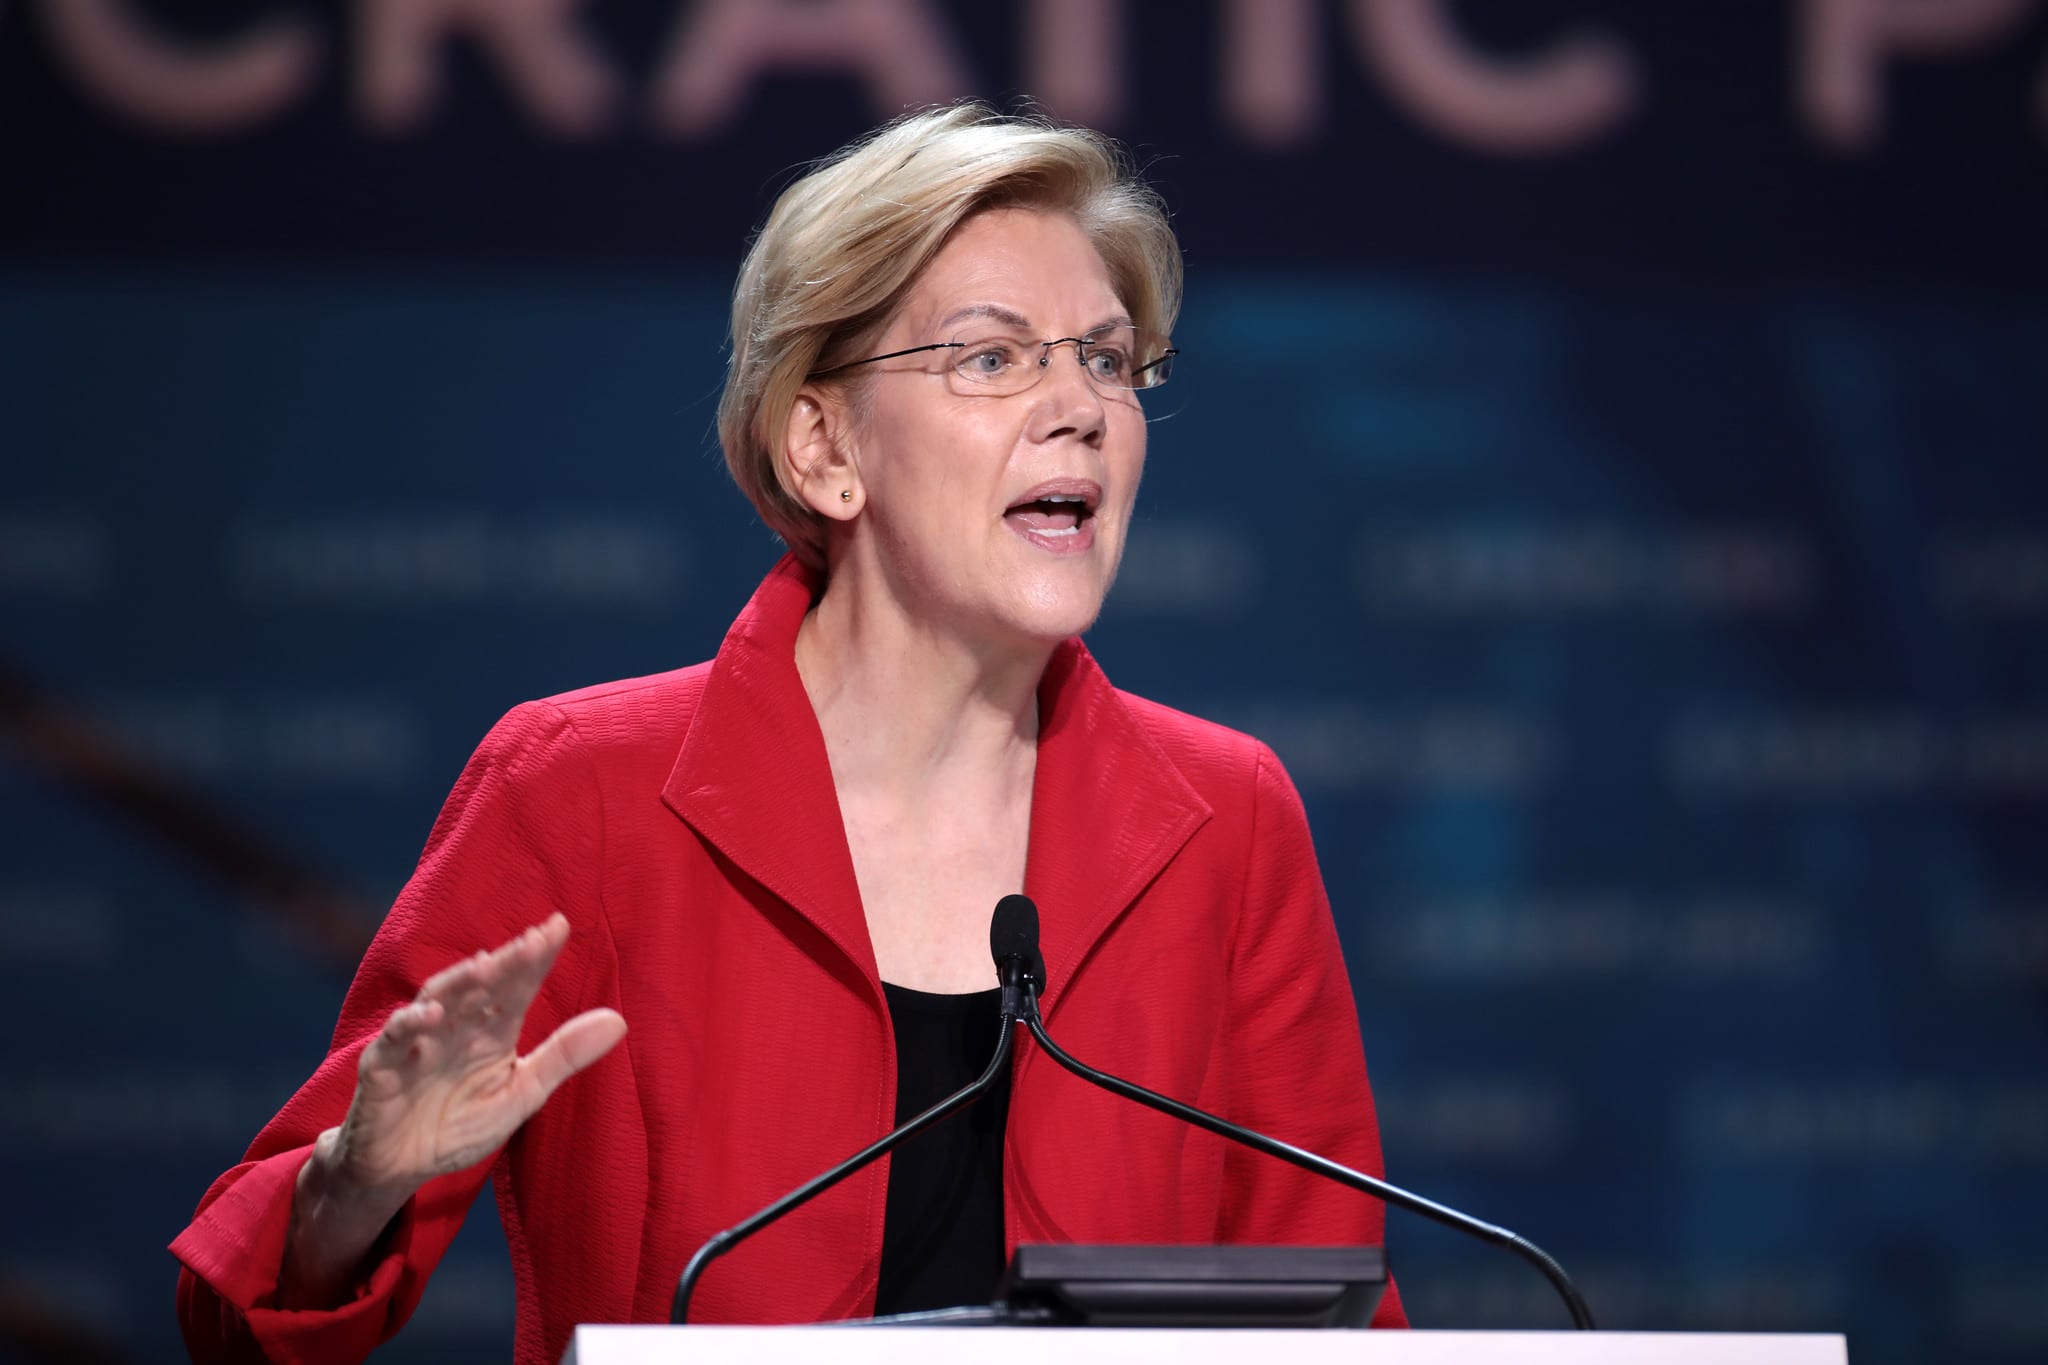 U.S. Senator Elizabeth Warren speaking with attendees at the 2019 California Democratic Party State Convention at the George R. Moscone Convention Center in San Francisco, California. Image by Gage Skidmore, via Flickr, CC BY-SA 2.0, no changes.